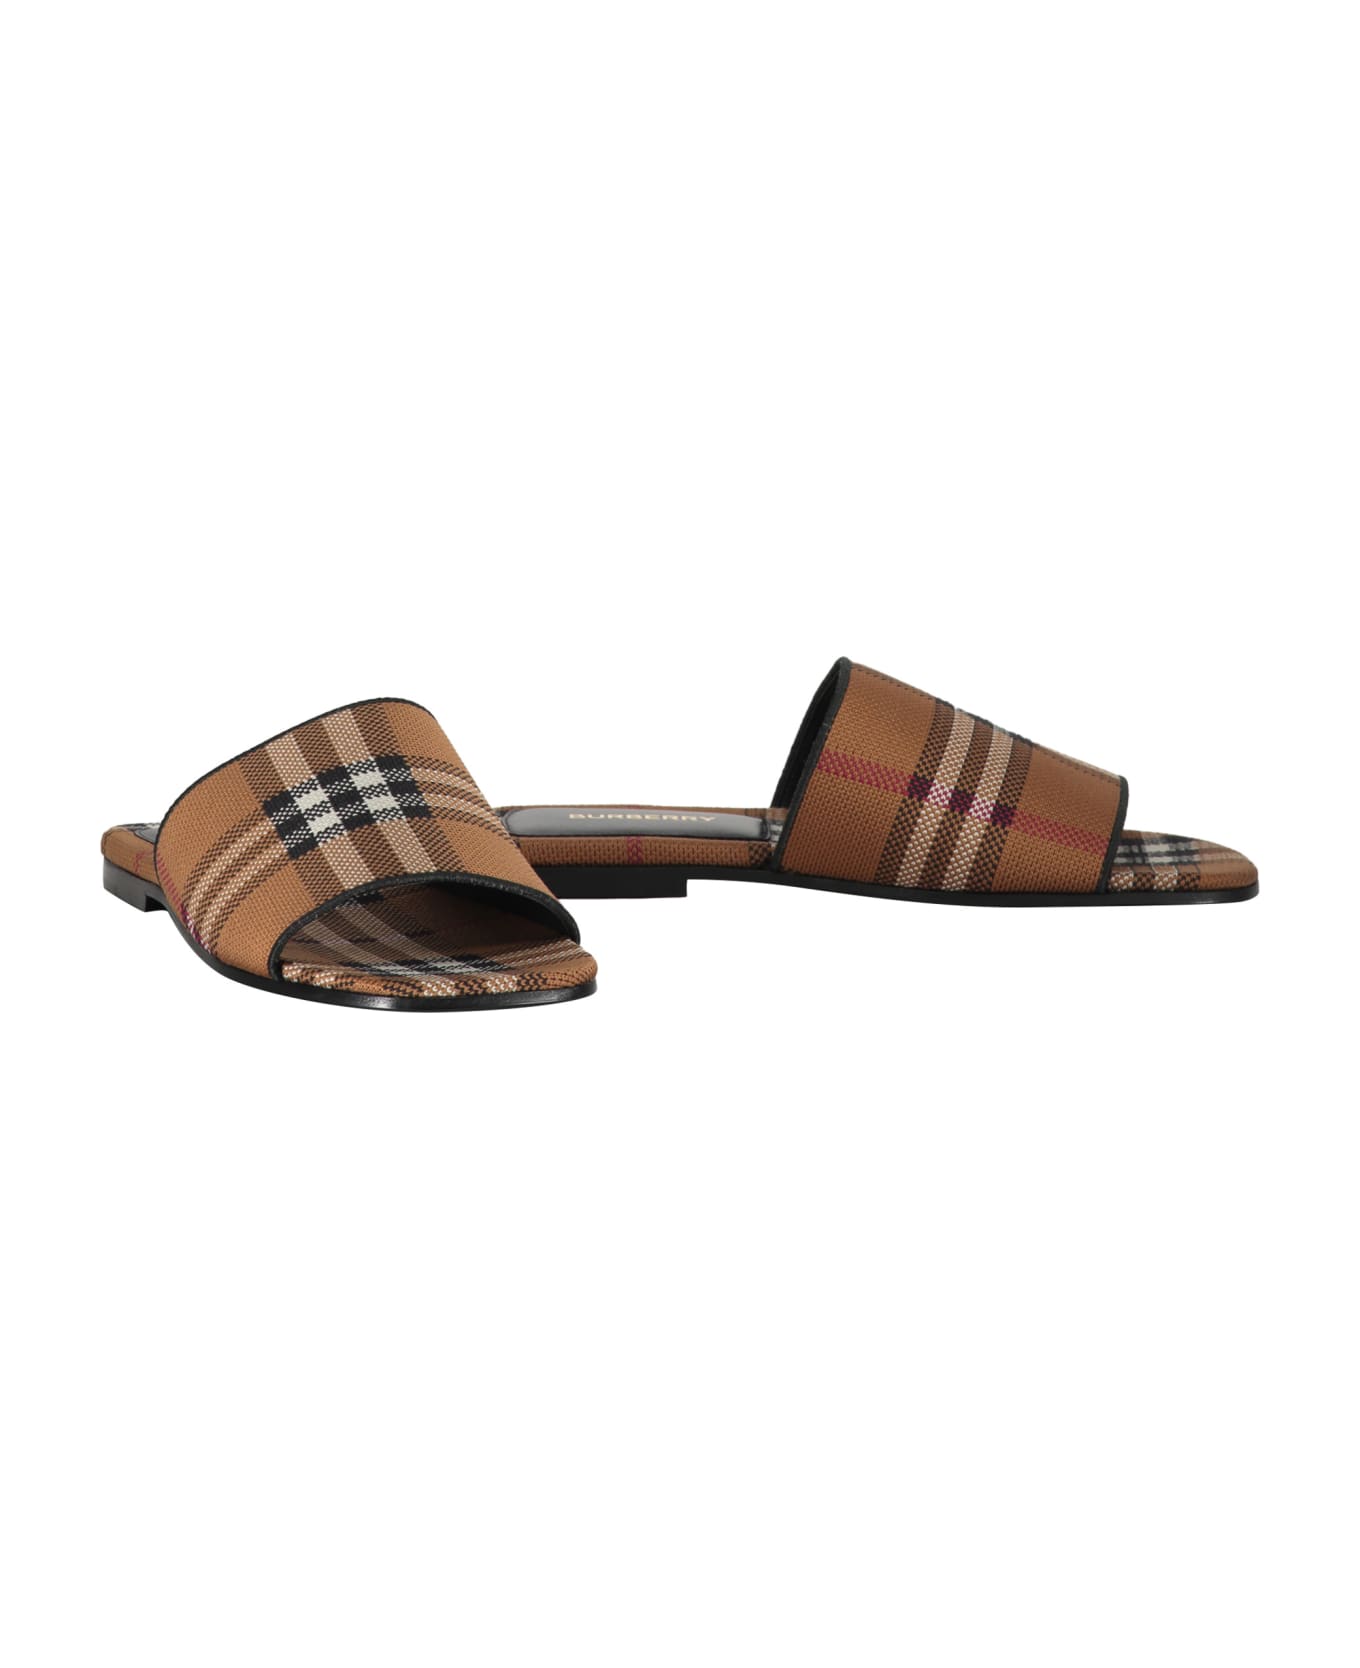 Burberry Leather And Fabric Slides - Beige サンダル